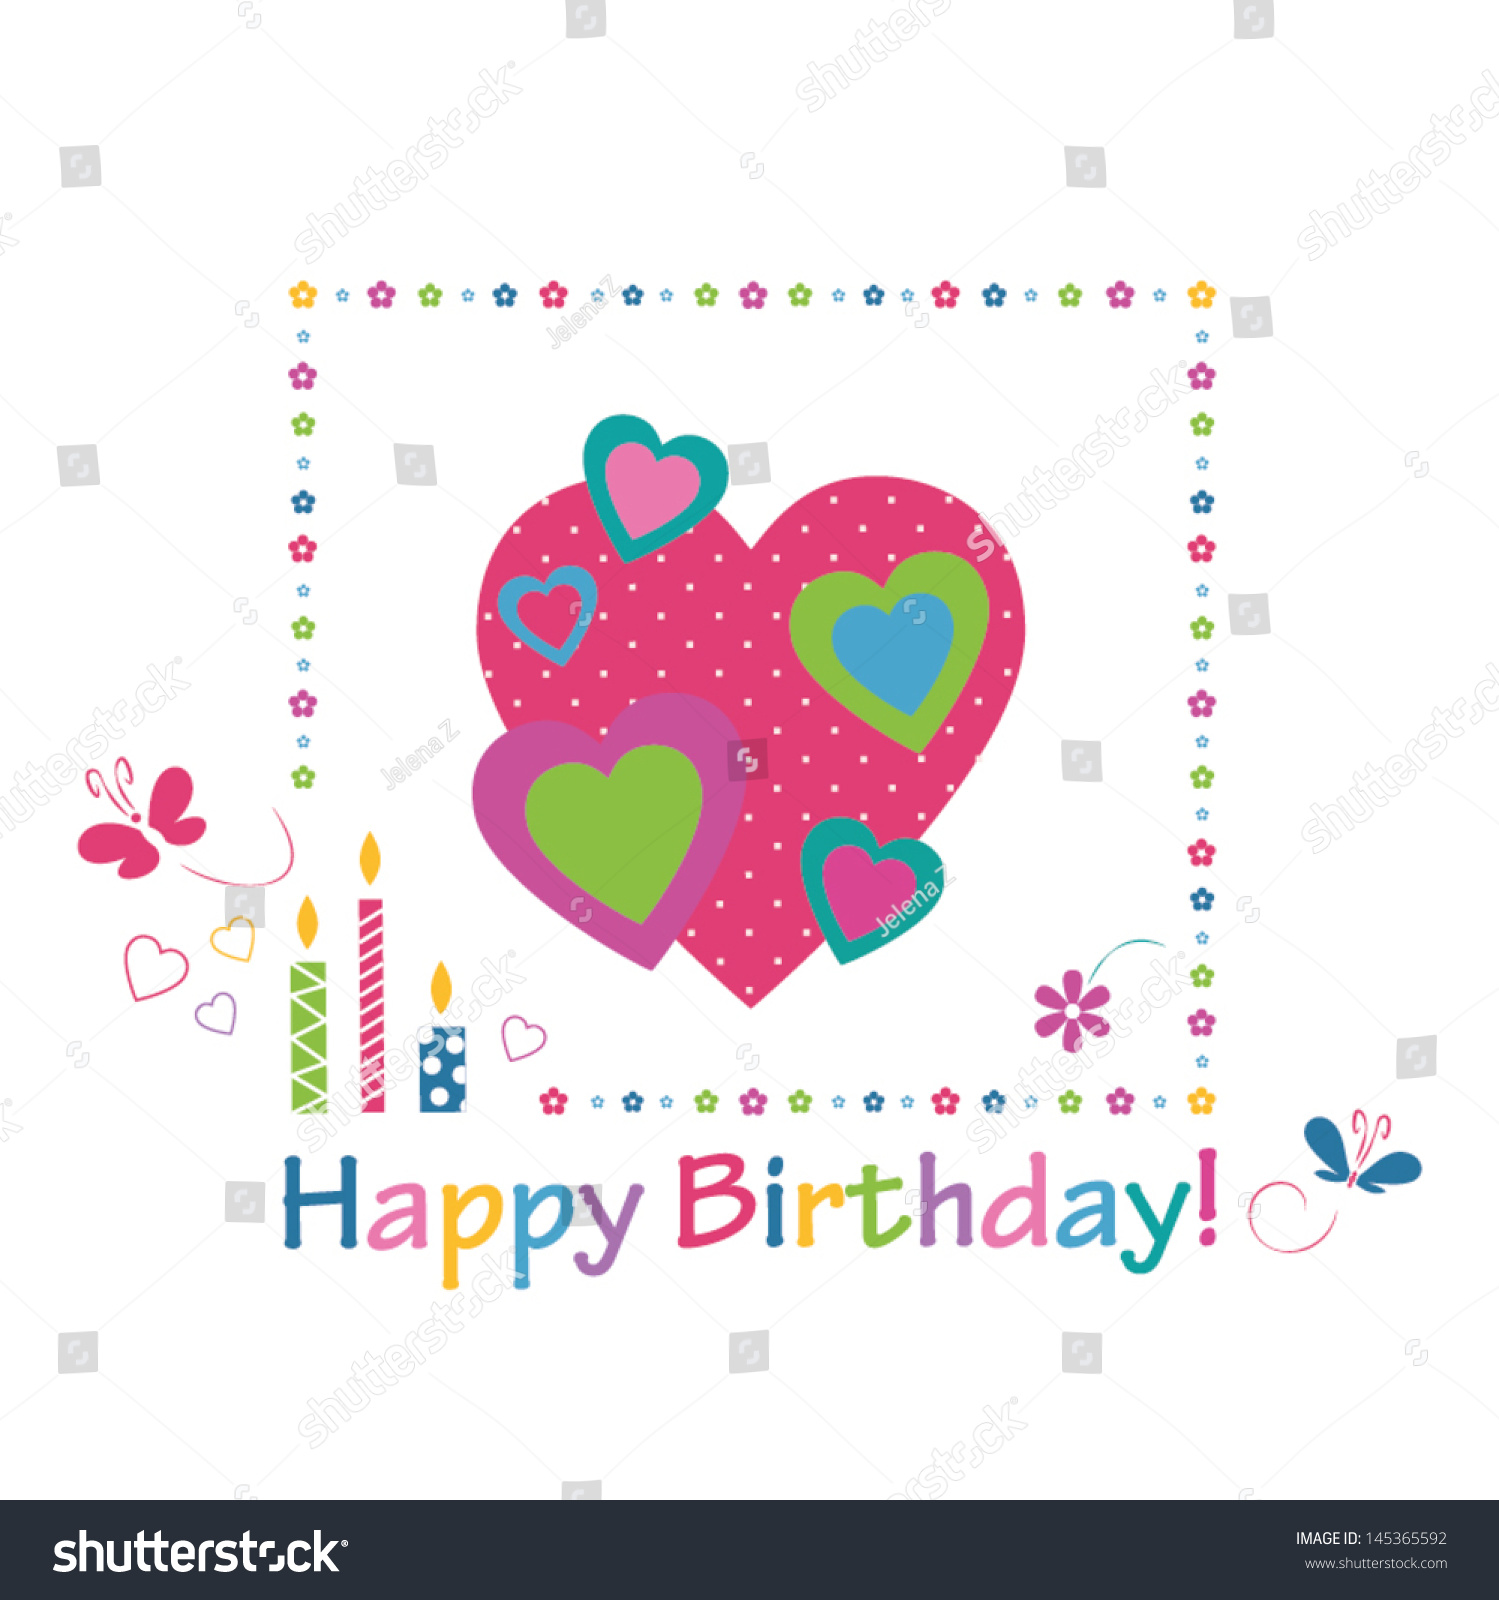 Colorful Hearts Happy Birthday Card Stock Vector (Royalty Free ...